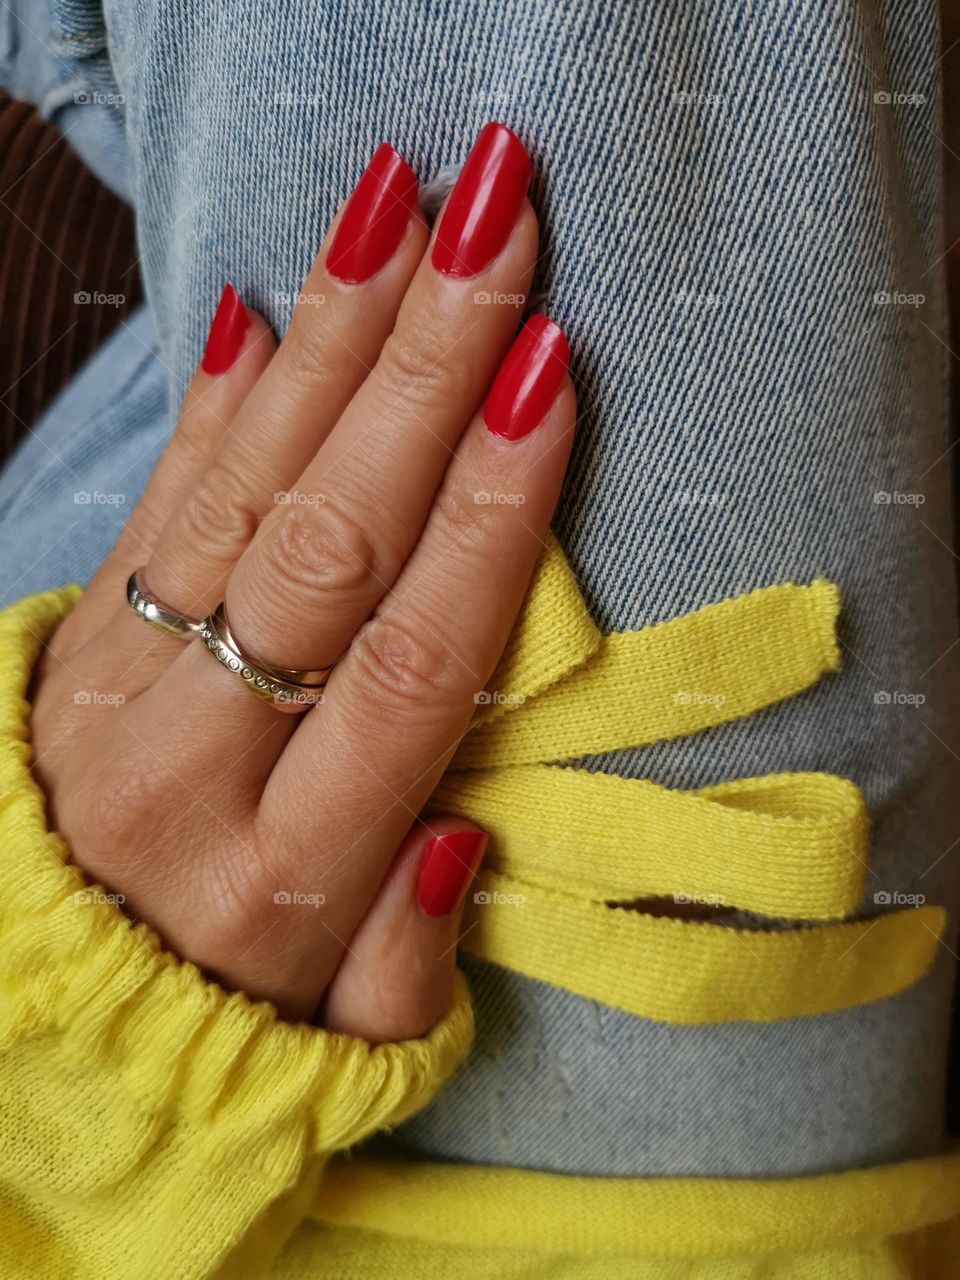 Red manicure, red nail polish . Yellow jumper.